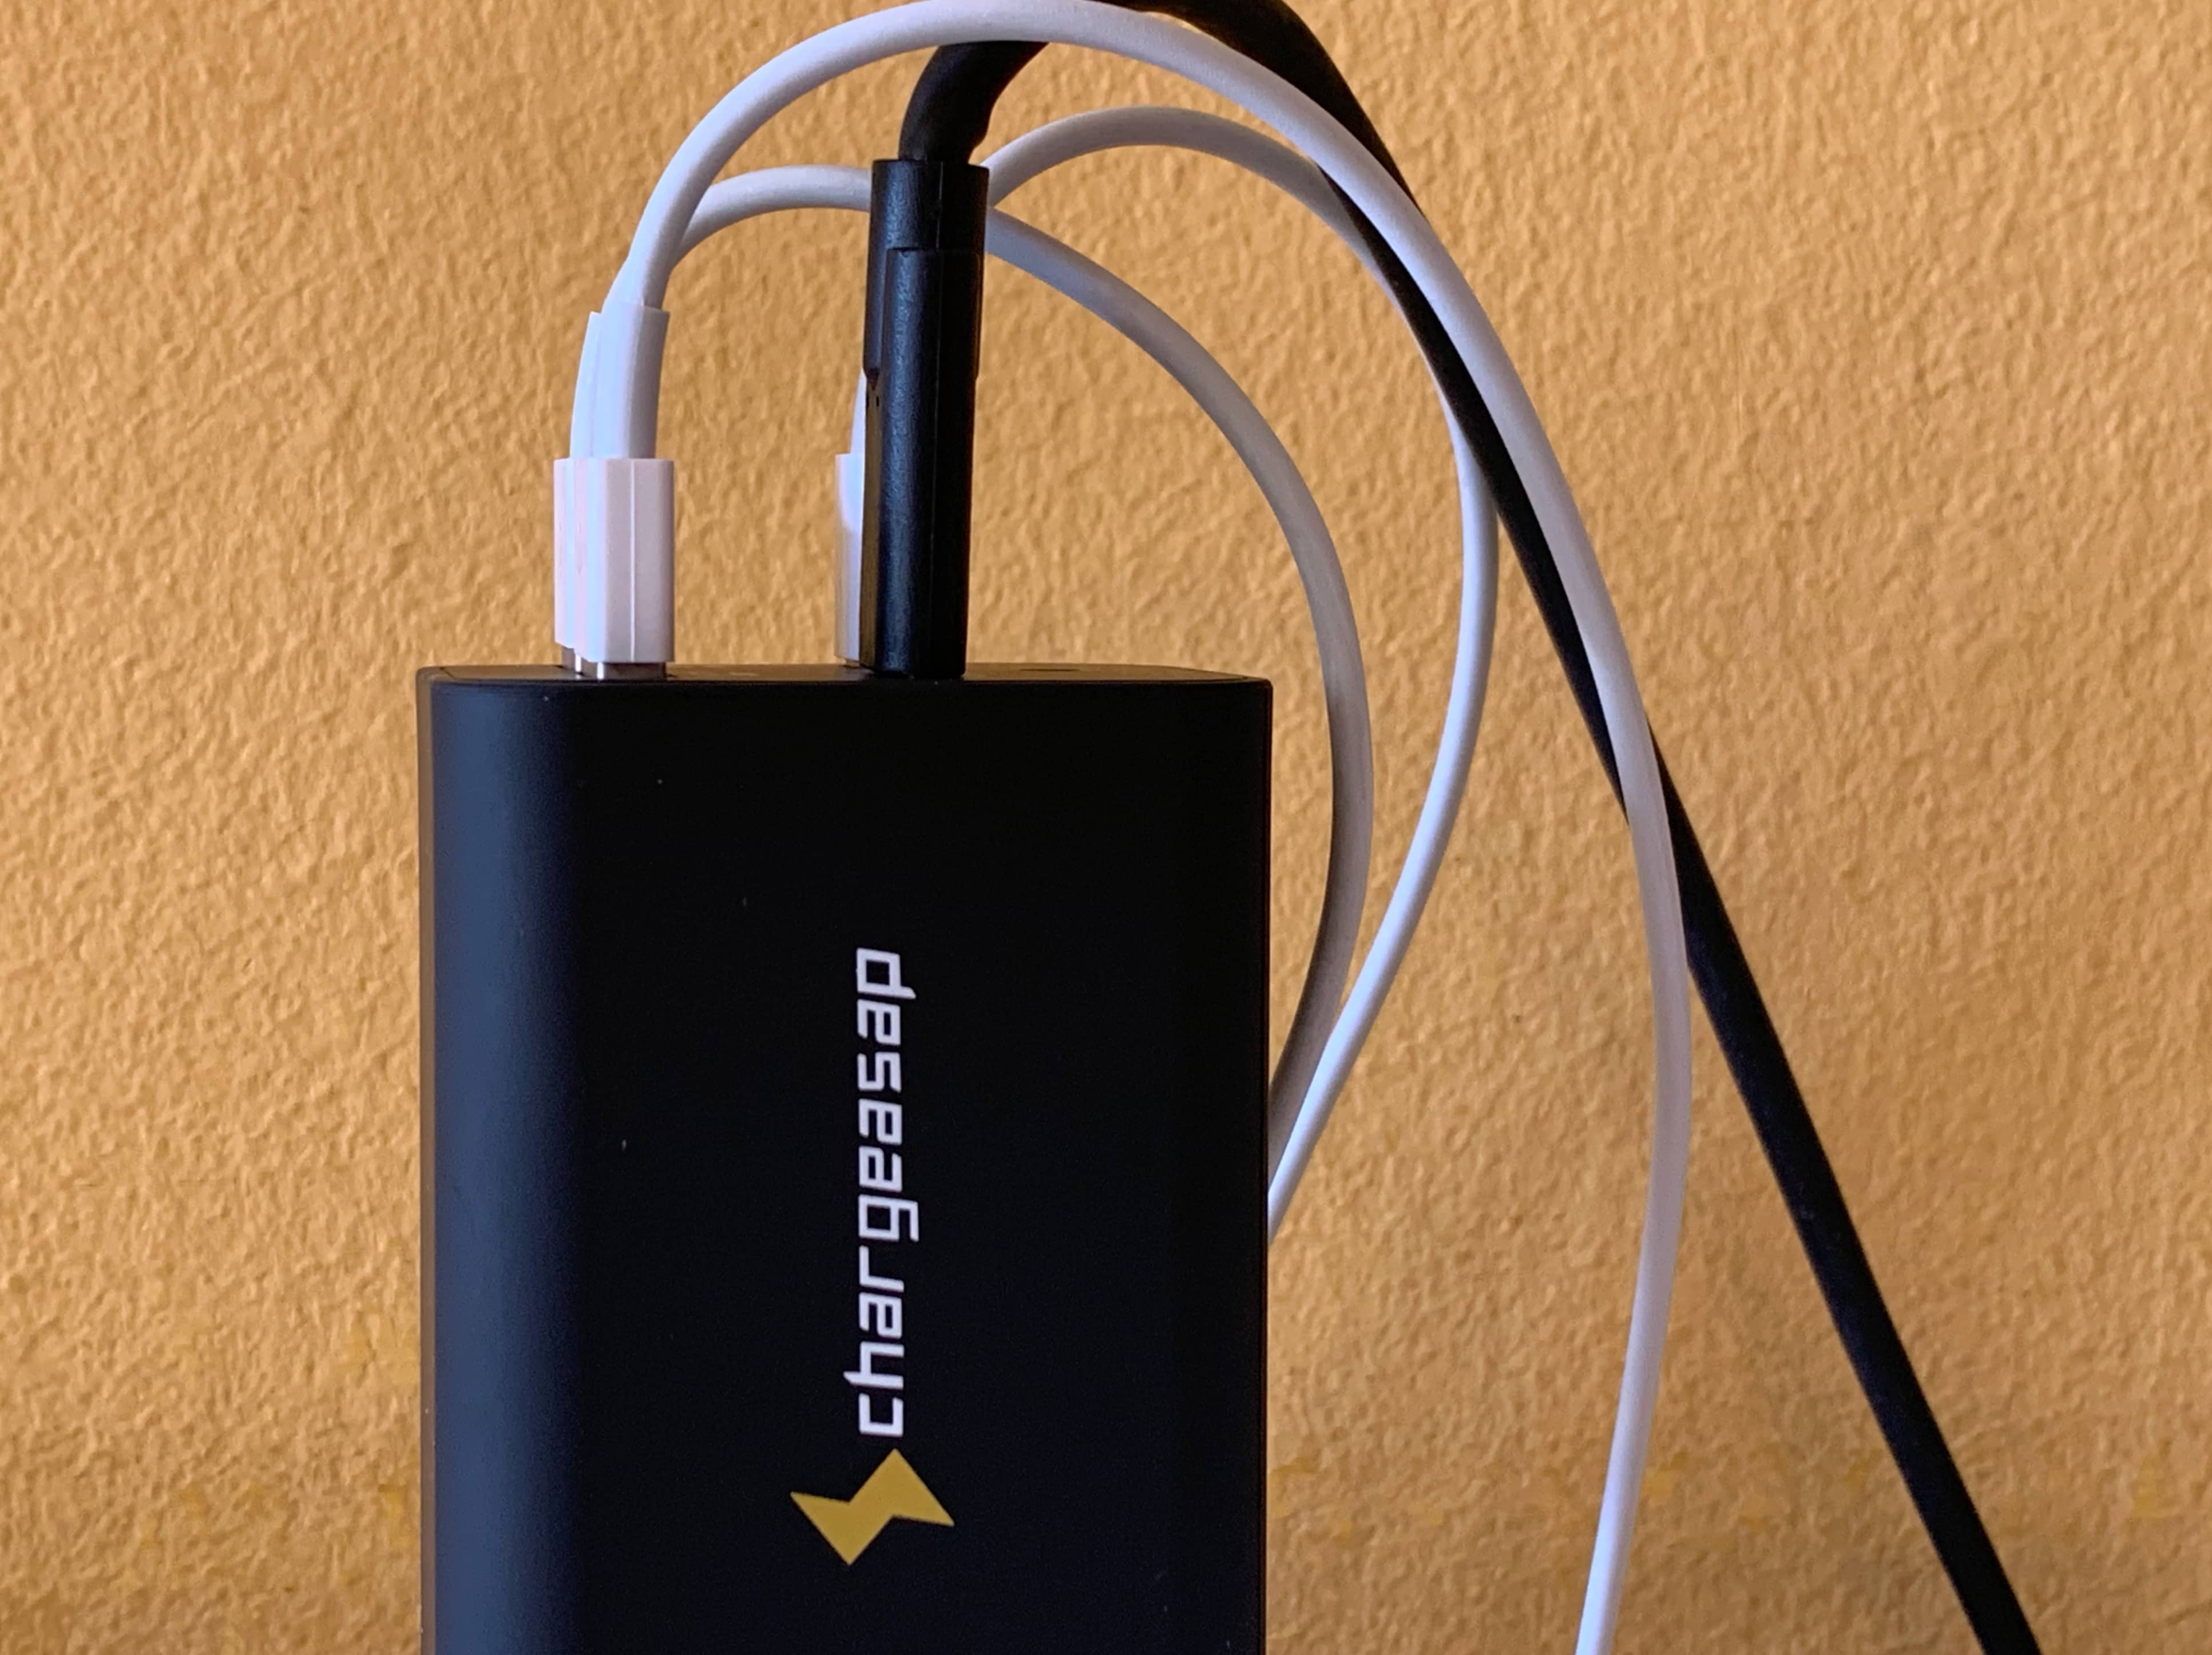 Chargeasap Omega chargers - 200W adapter in use, with cables connected to all four ports